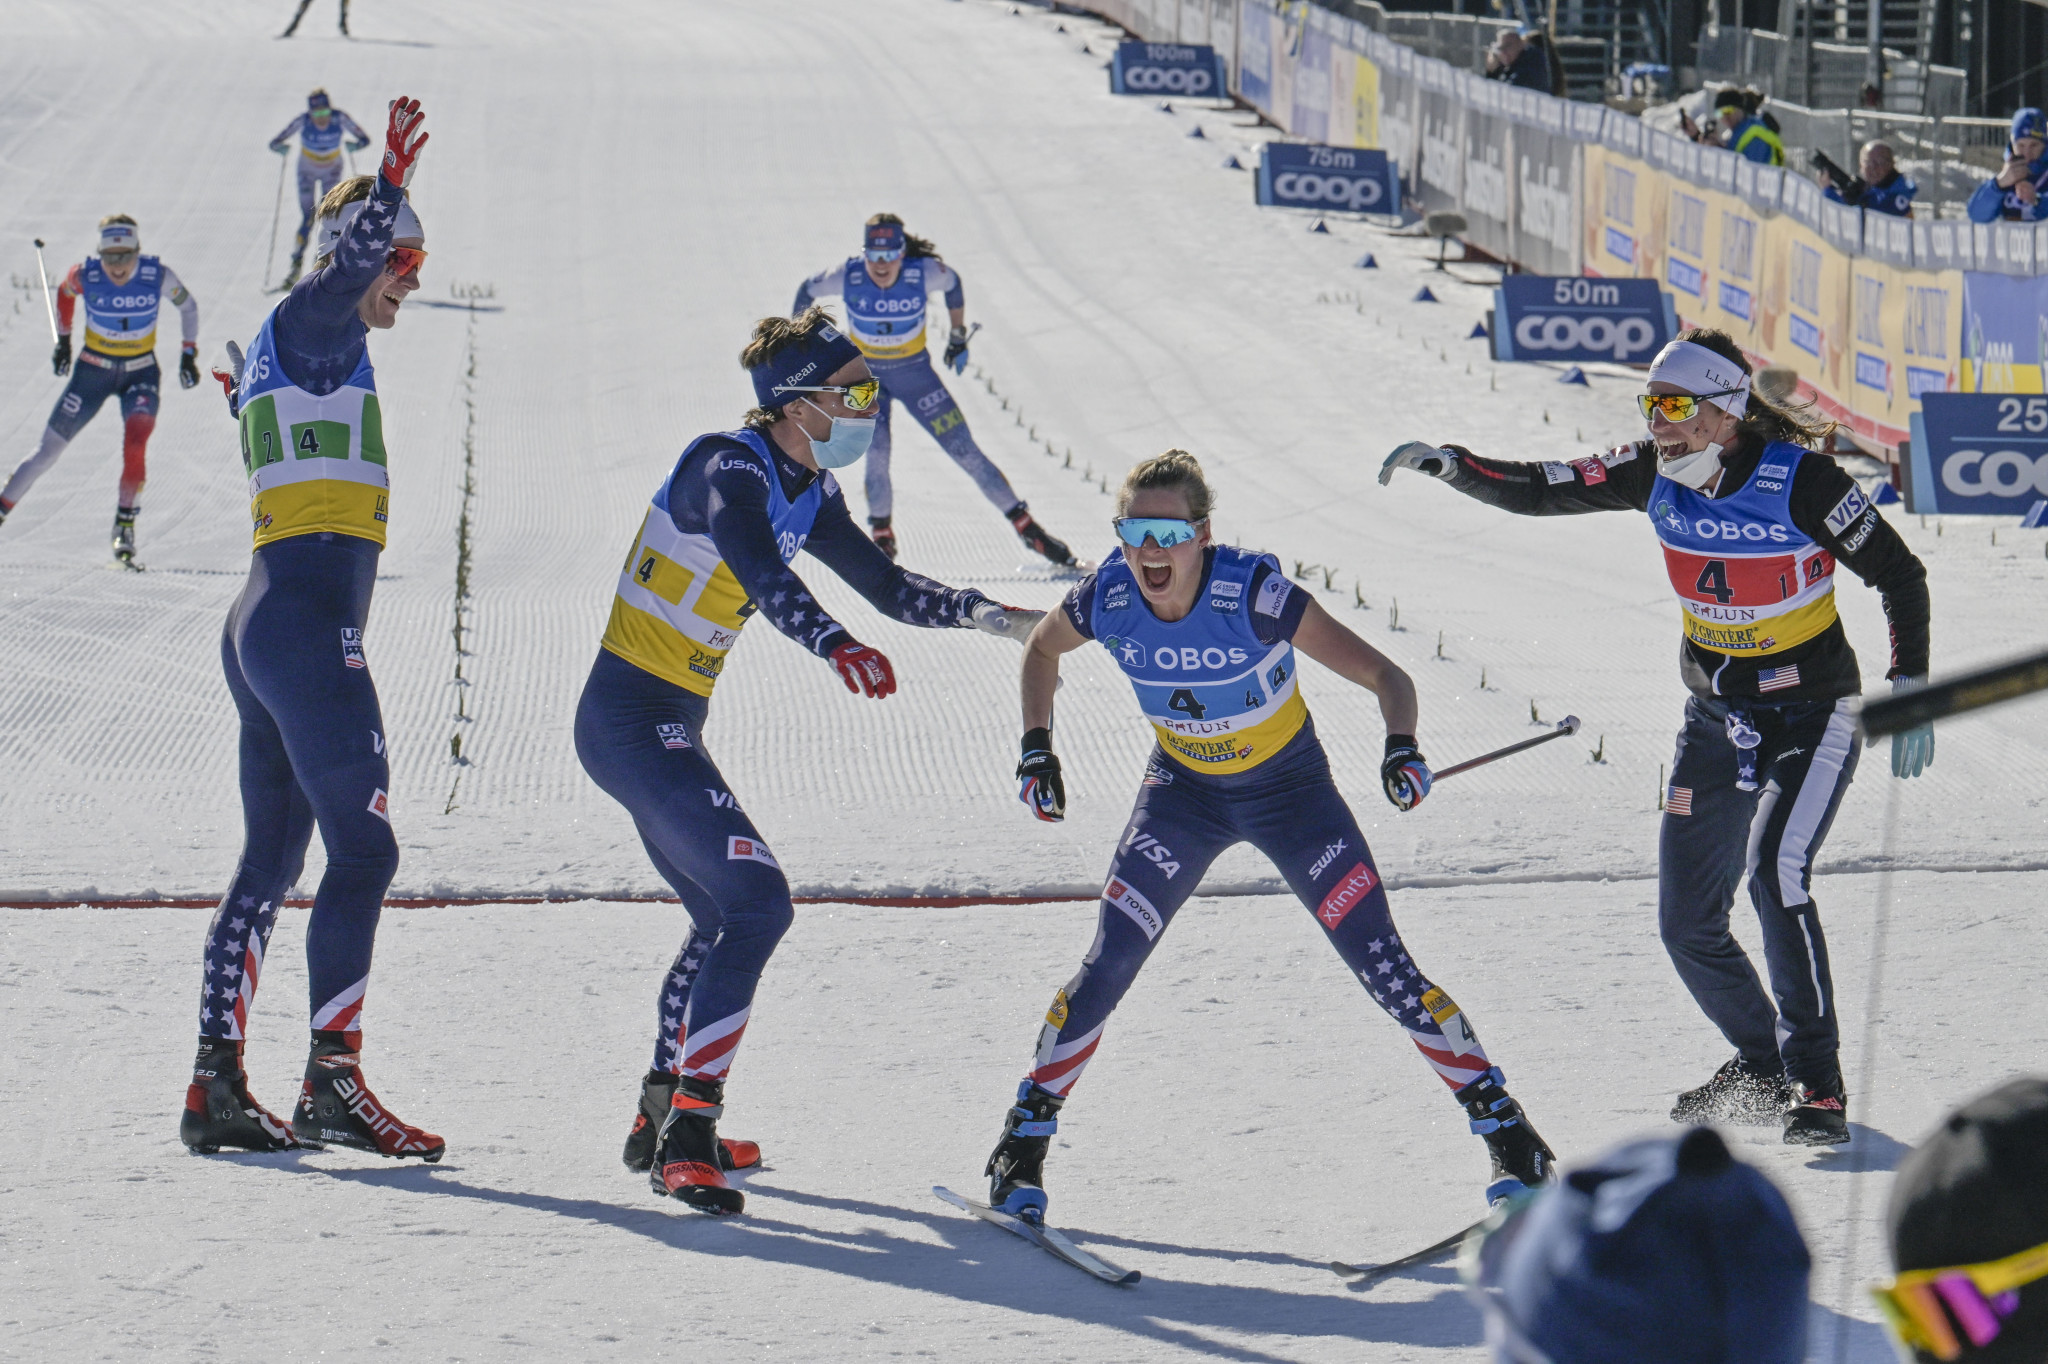 Americans take unexpected win in mixed relay at Falun Cross-Country World Cup